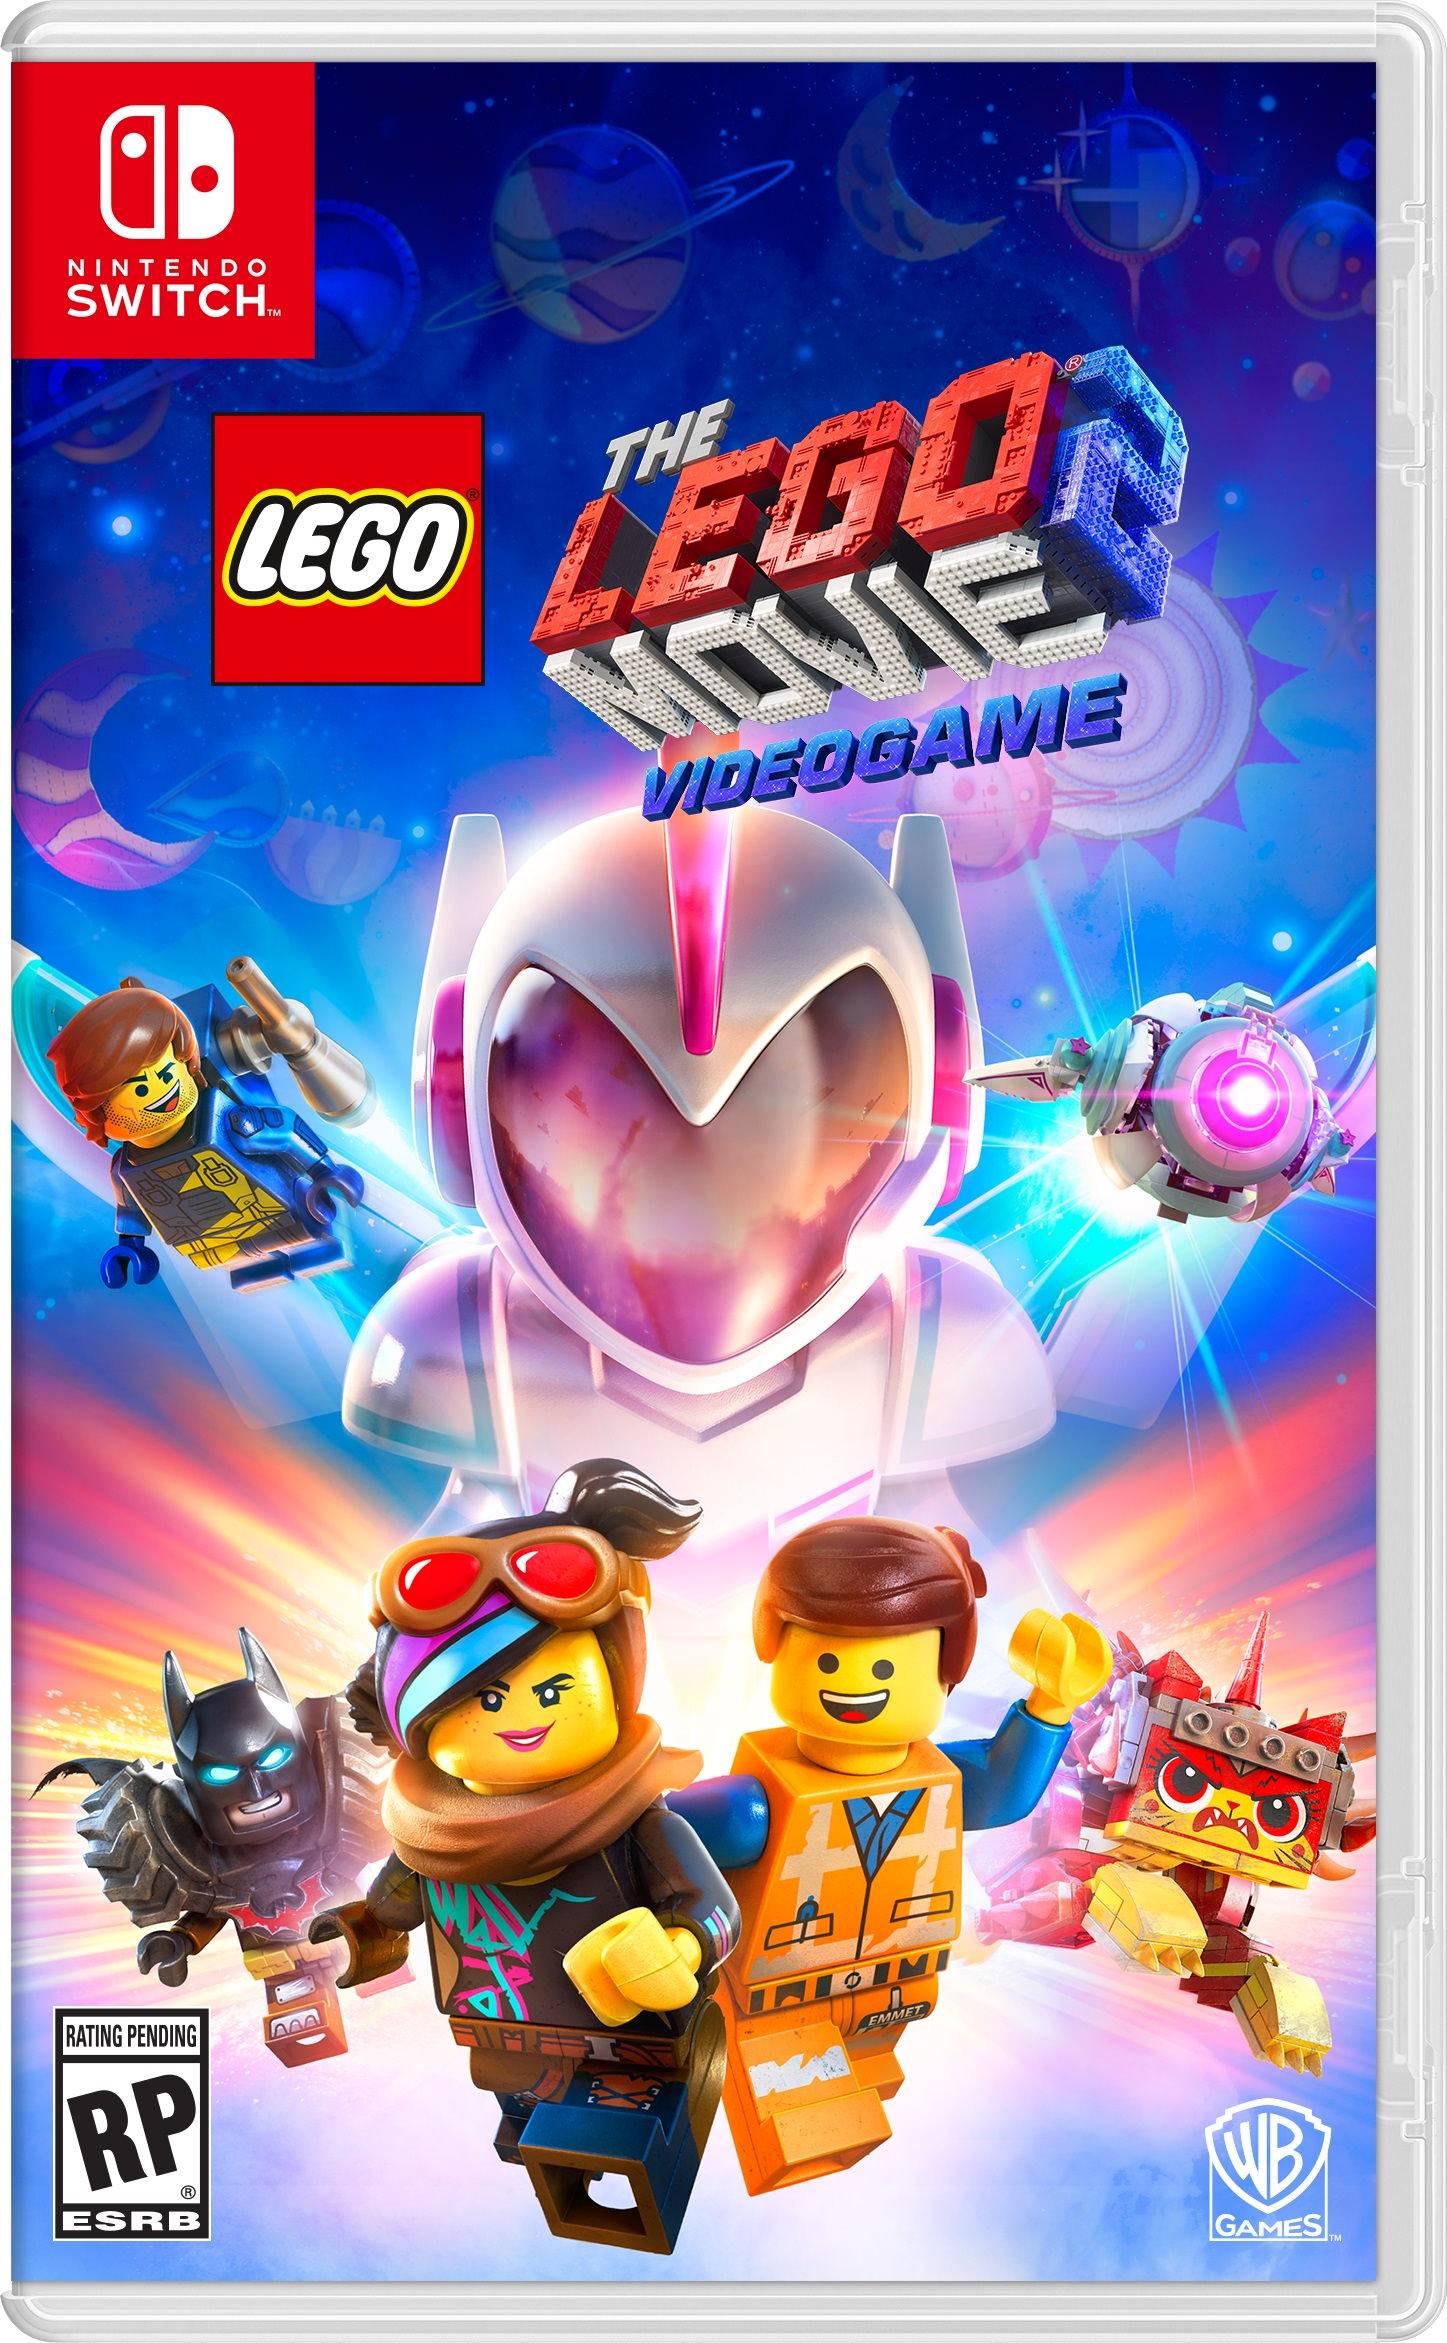 The LEGO Movie 2 Videogame Confirmed For Switch, First Screenshots